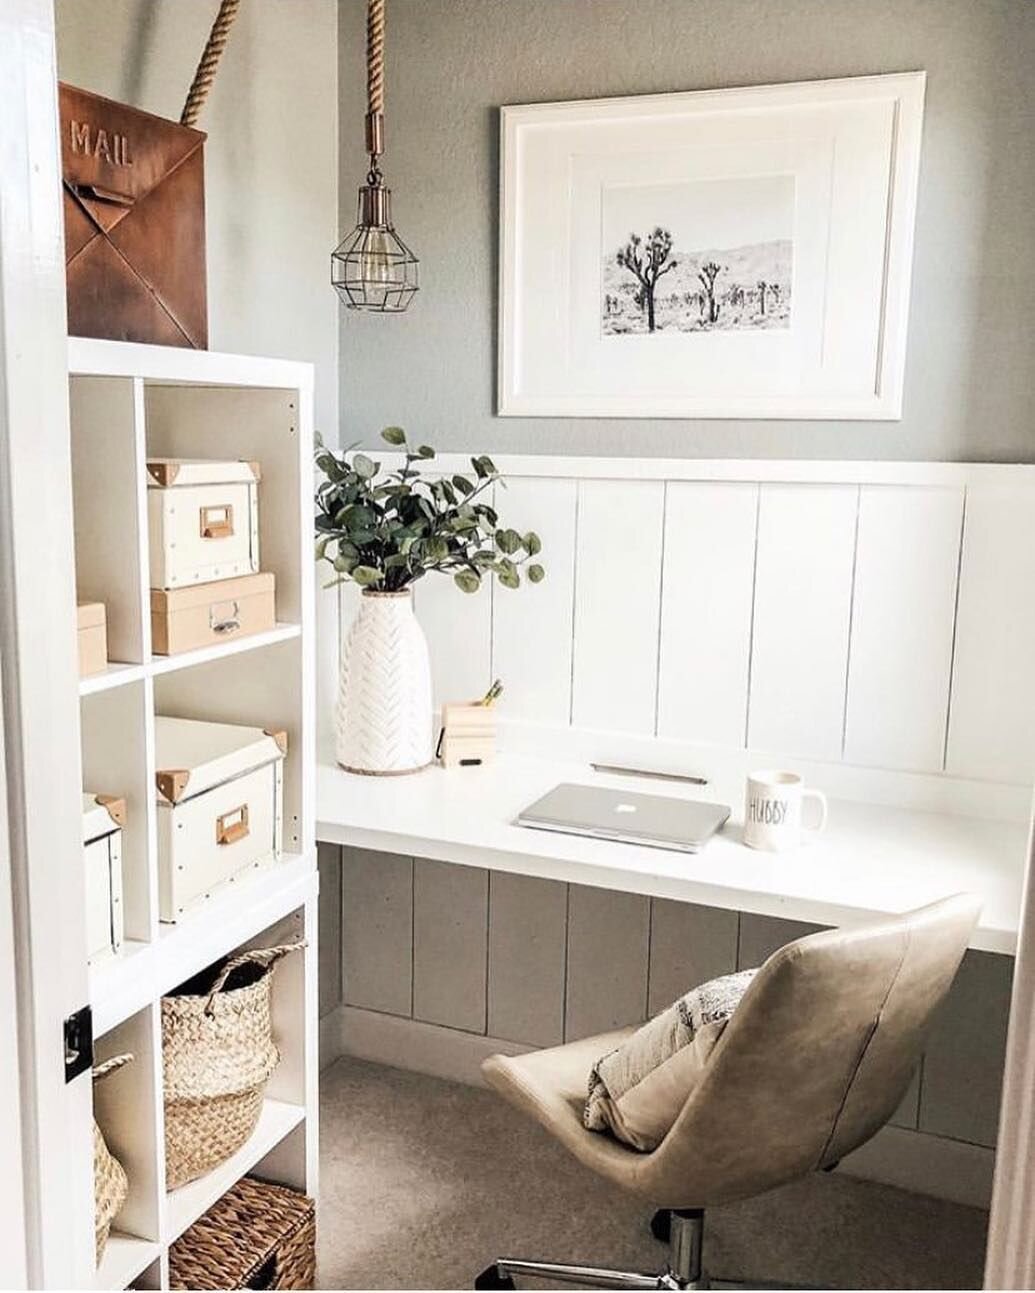 Real Simple on Instagram_ “We wouldn’t mind working at @thebloomingnest’s neat and tidy desk! #rshome”.jpeg